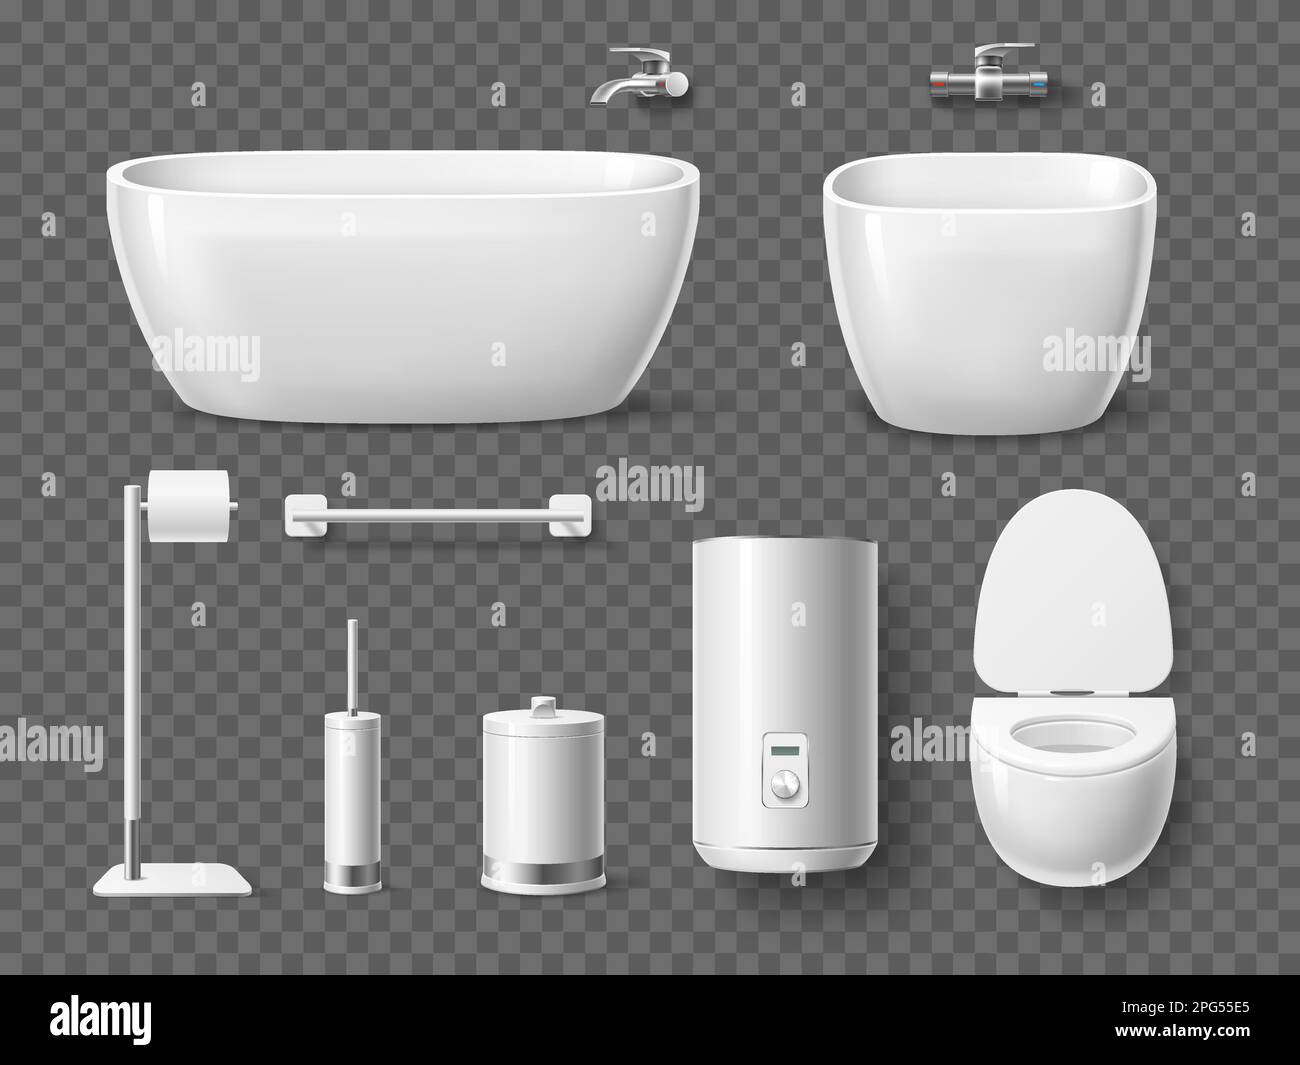 Realistic bathroom and toilet elements. Shower and toilet objects, sink and bidet, bath and boiler, white hygienic ceramics, wc interior. Lavatory Stock Vector